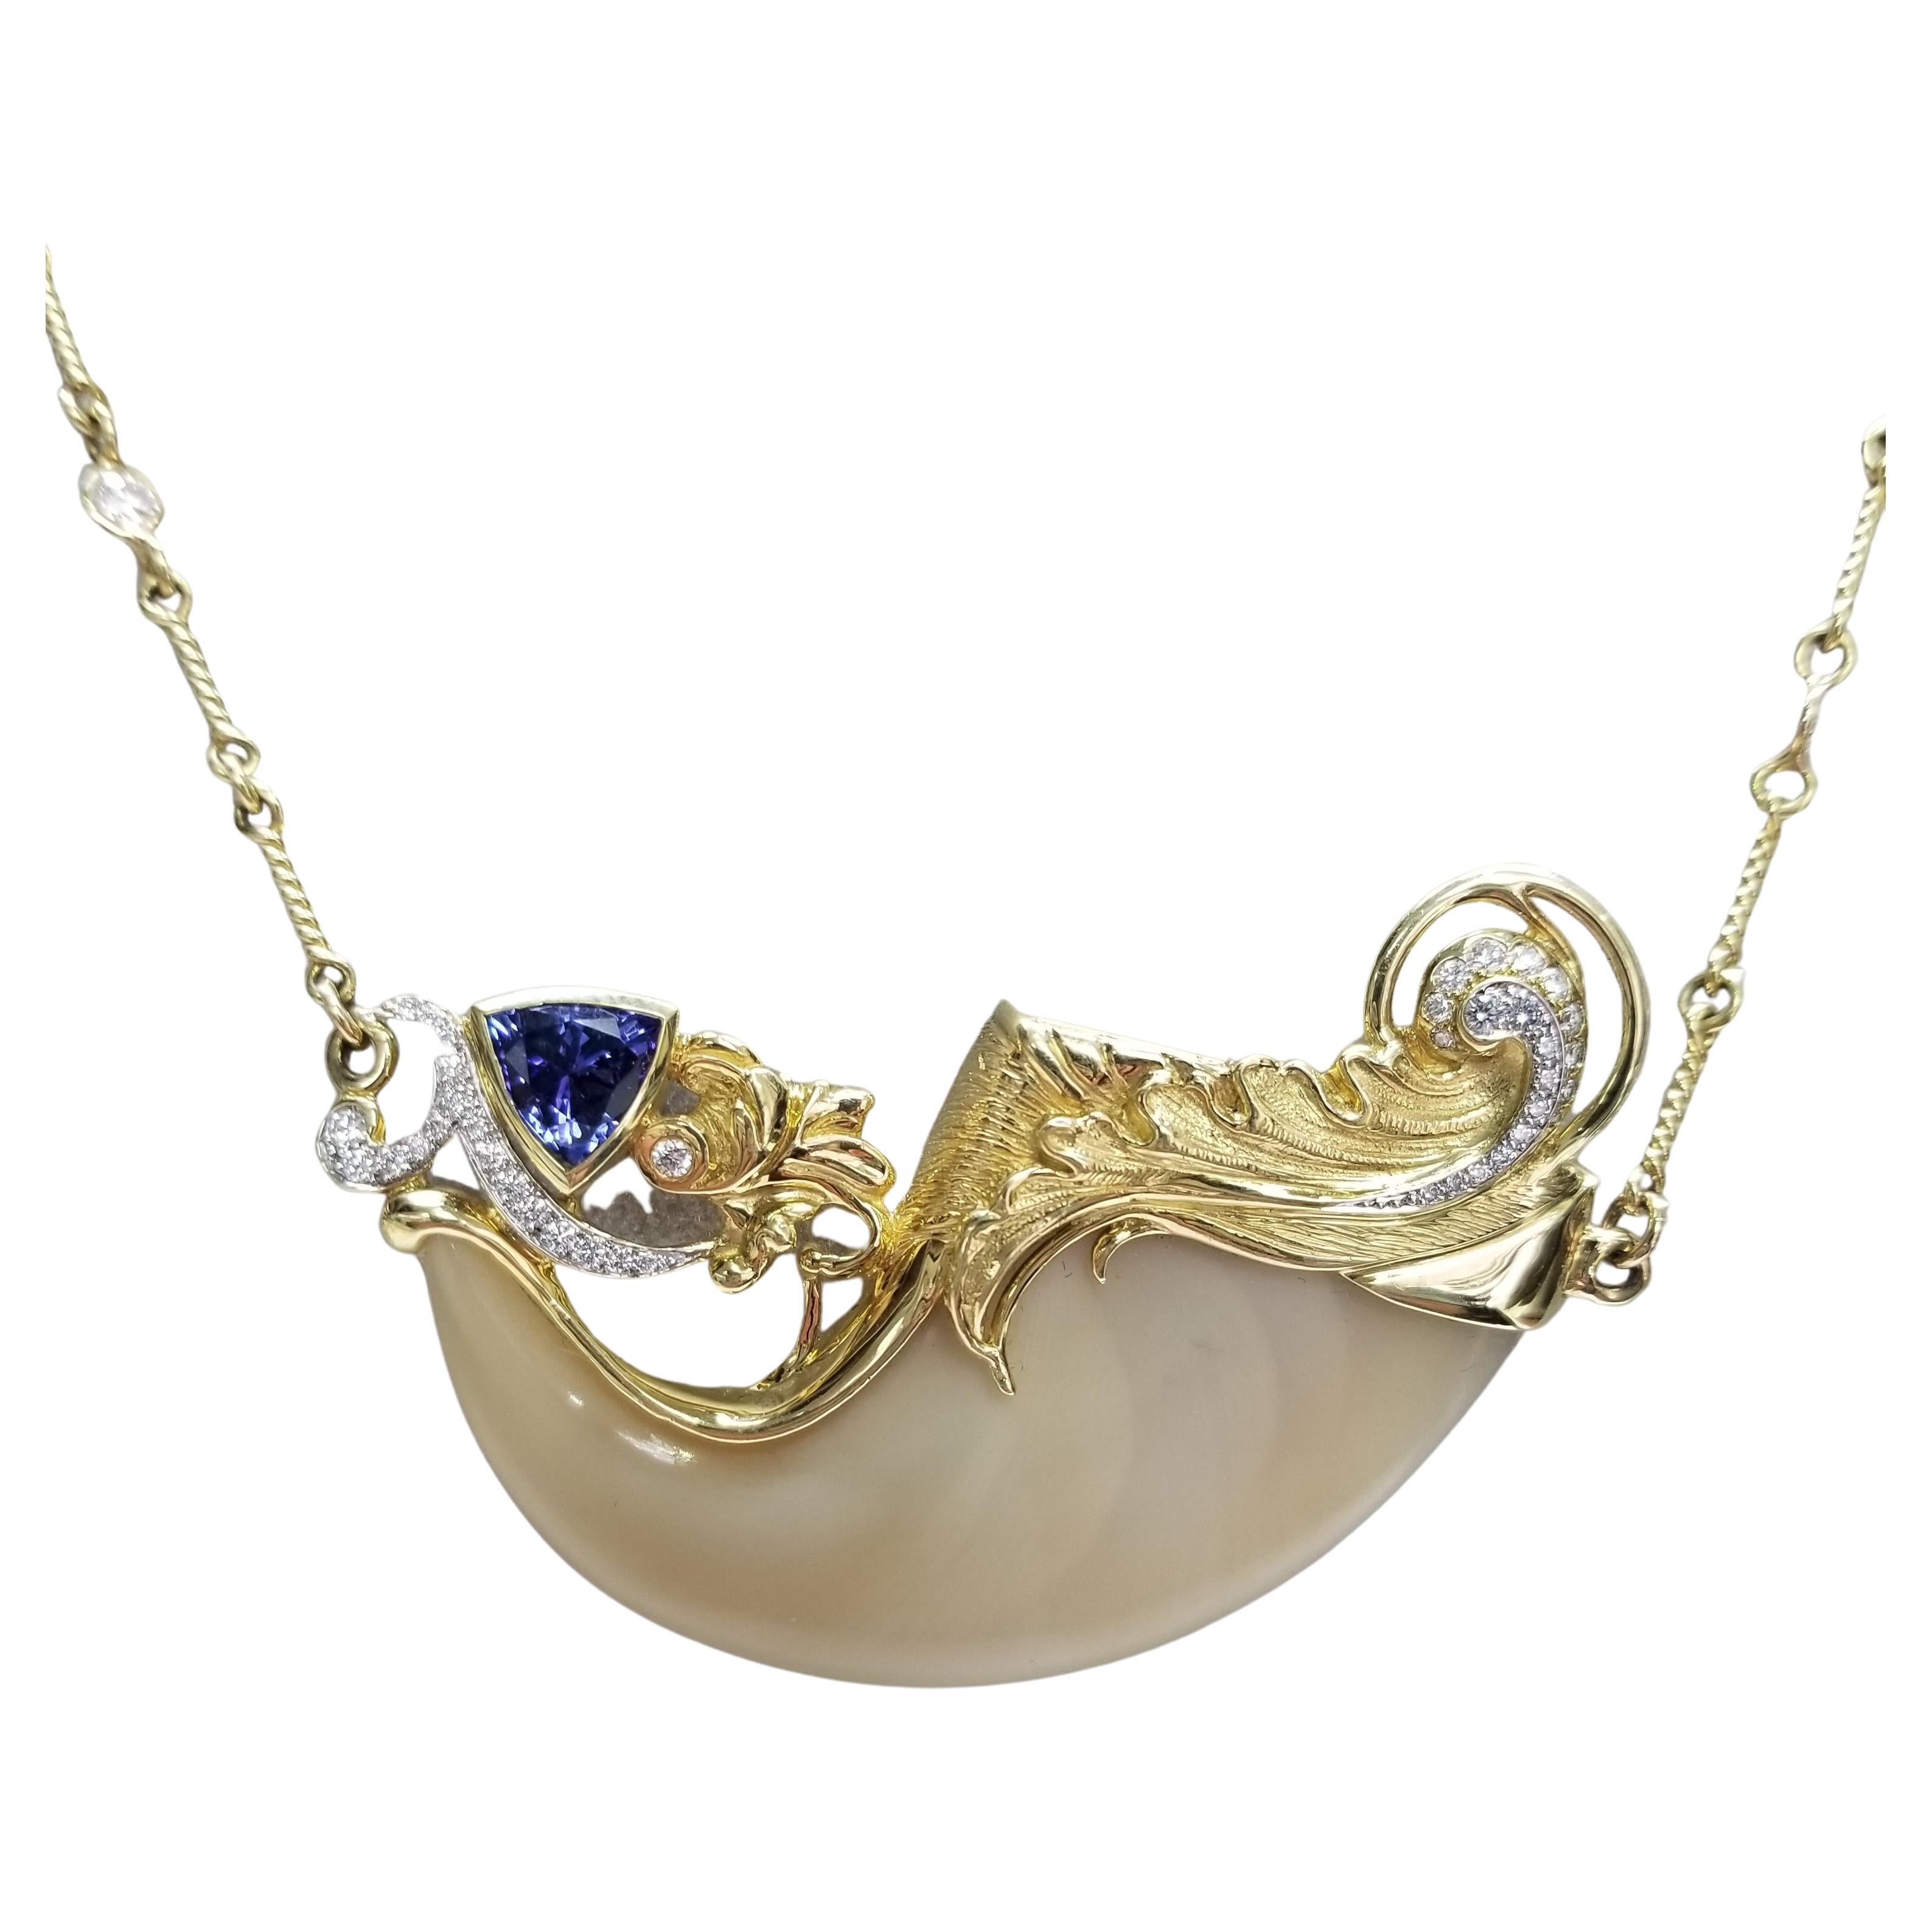 Madleine Kay 18k Yellow Gold "Lion Claw " with Diamonds Paved and Tanzanite